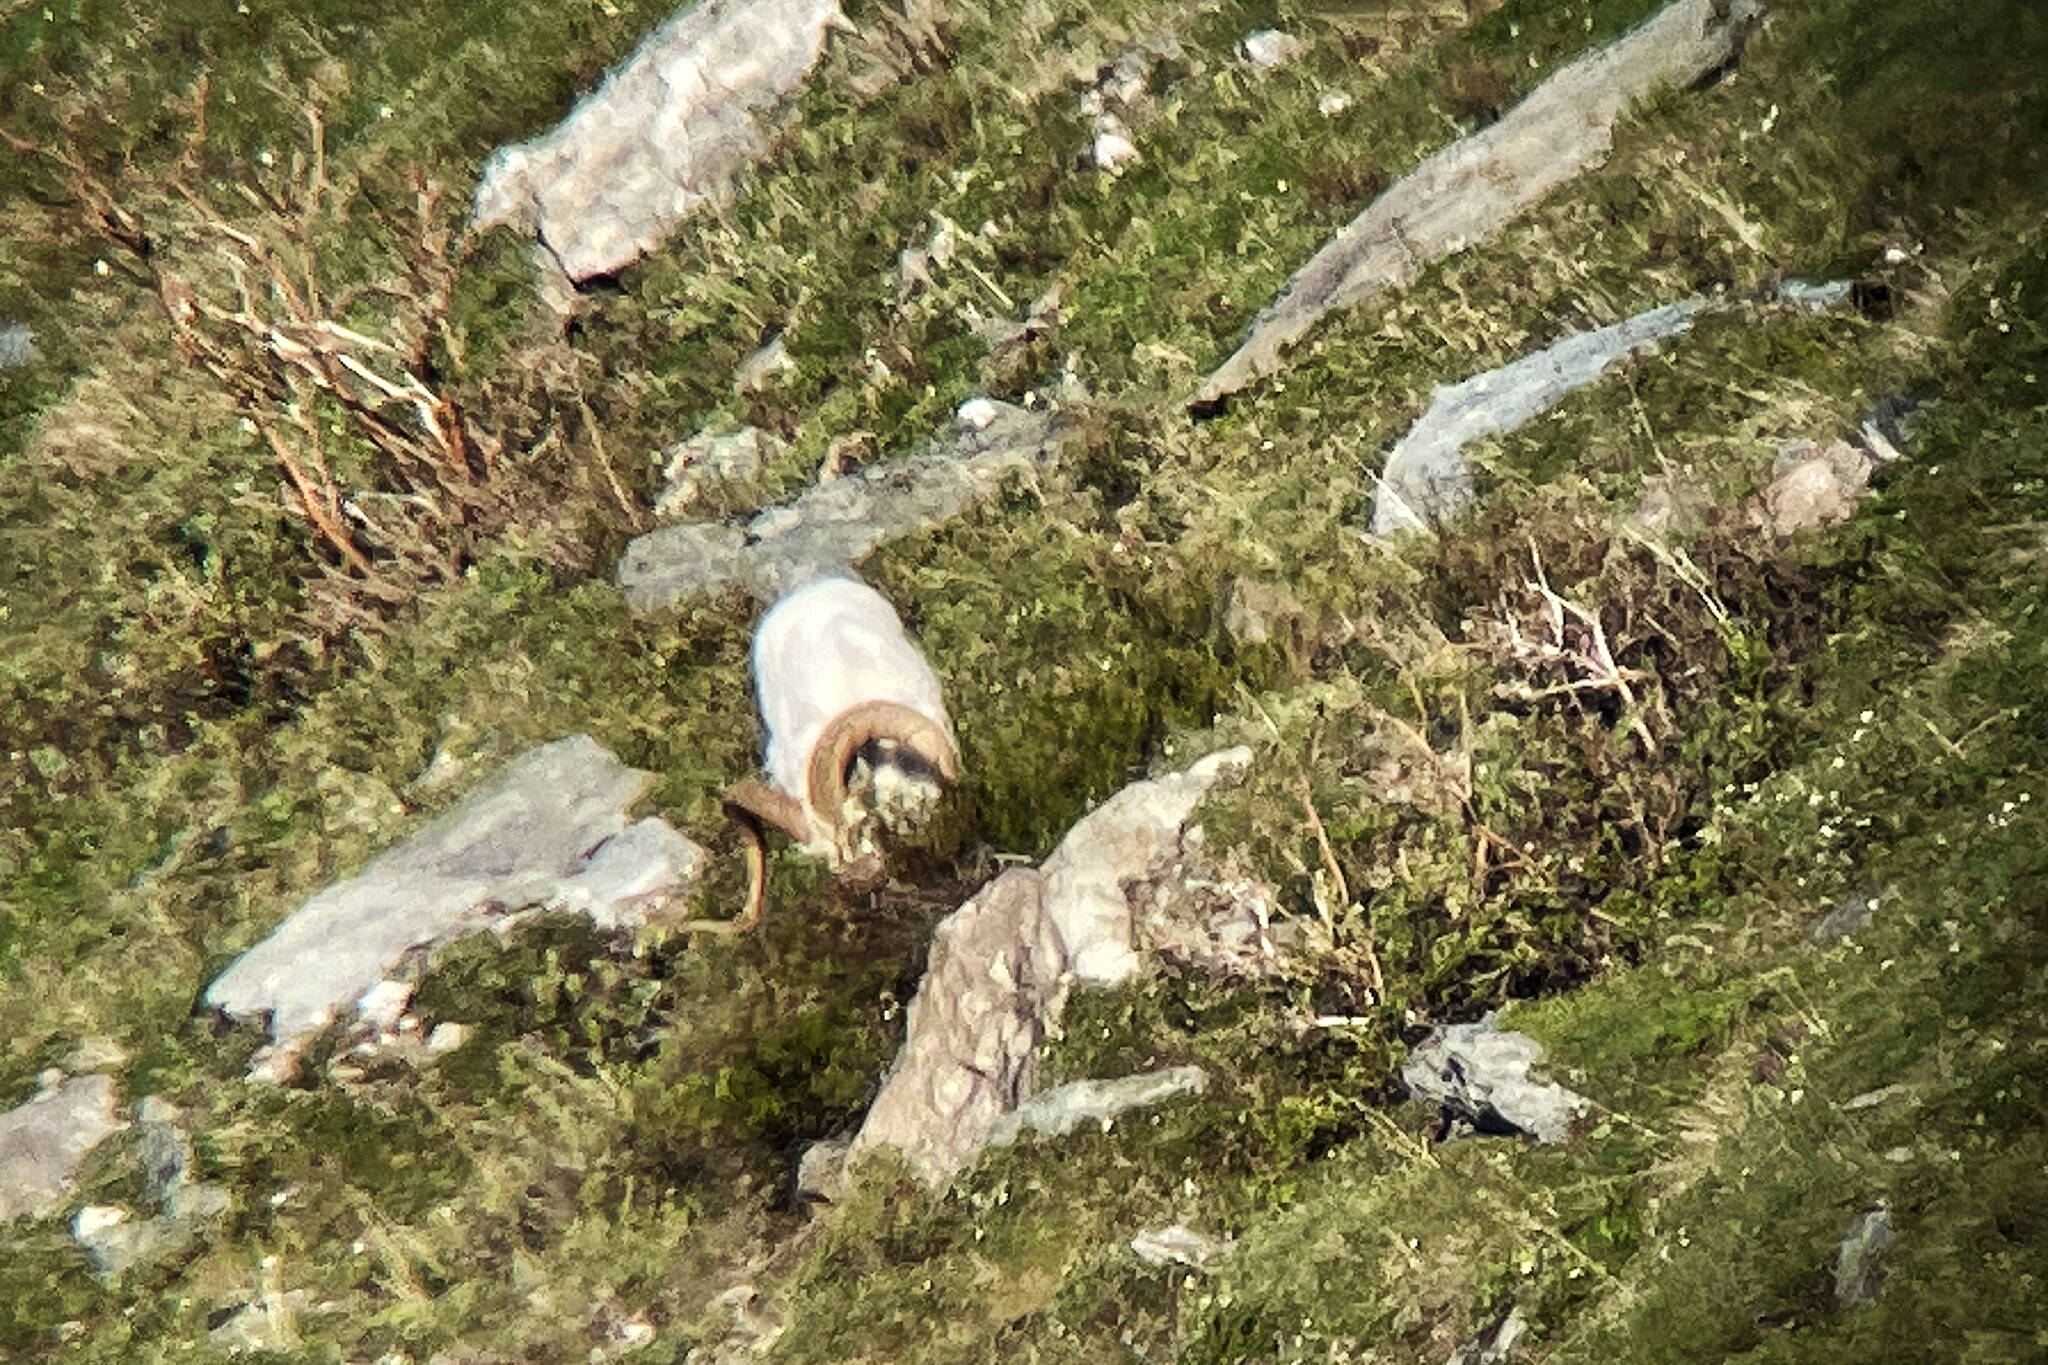 Through the author’s spotting scope: A Dall sheep feeds in Denali National Park near the Teklanika River. (Photo by Jeff Lund)